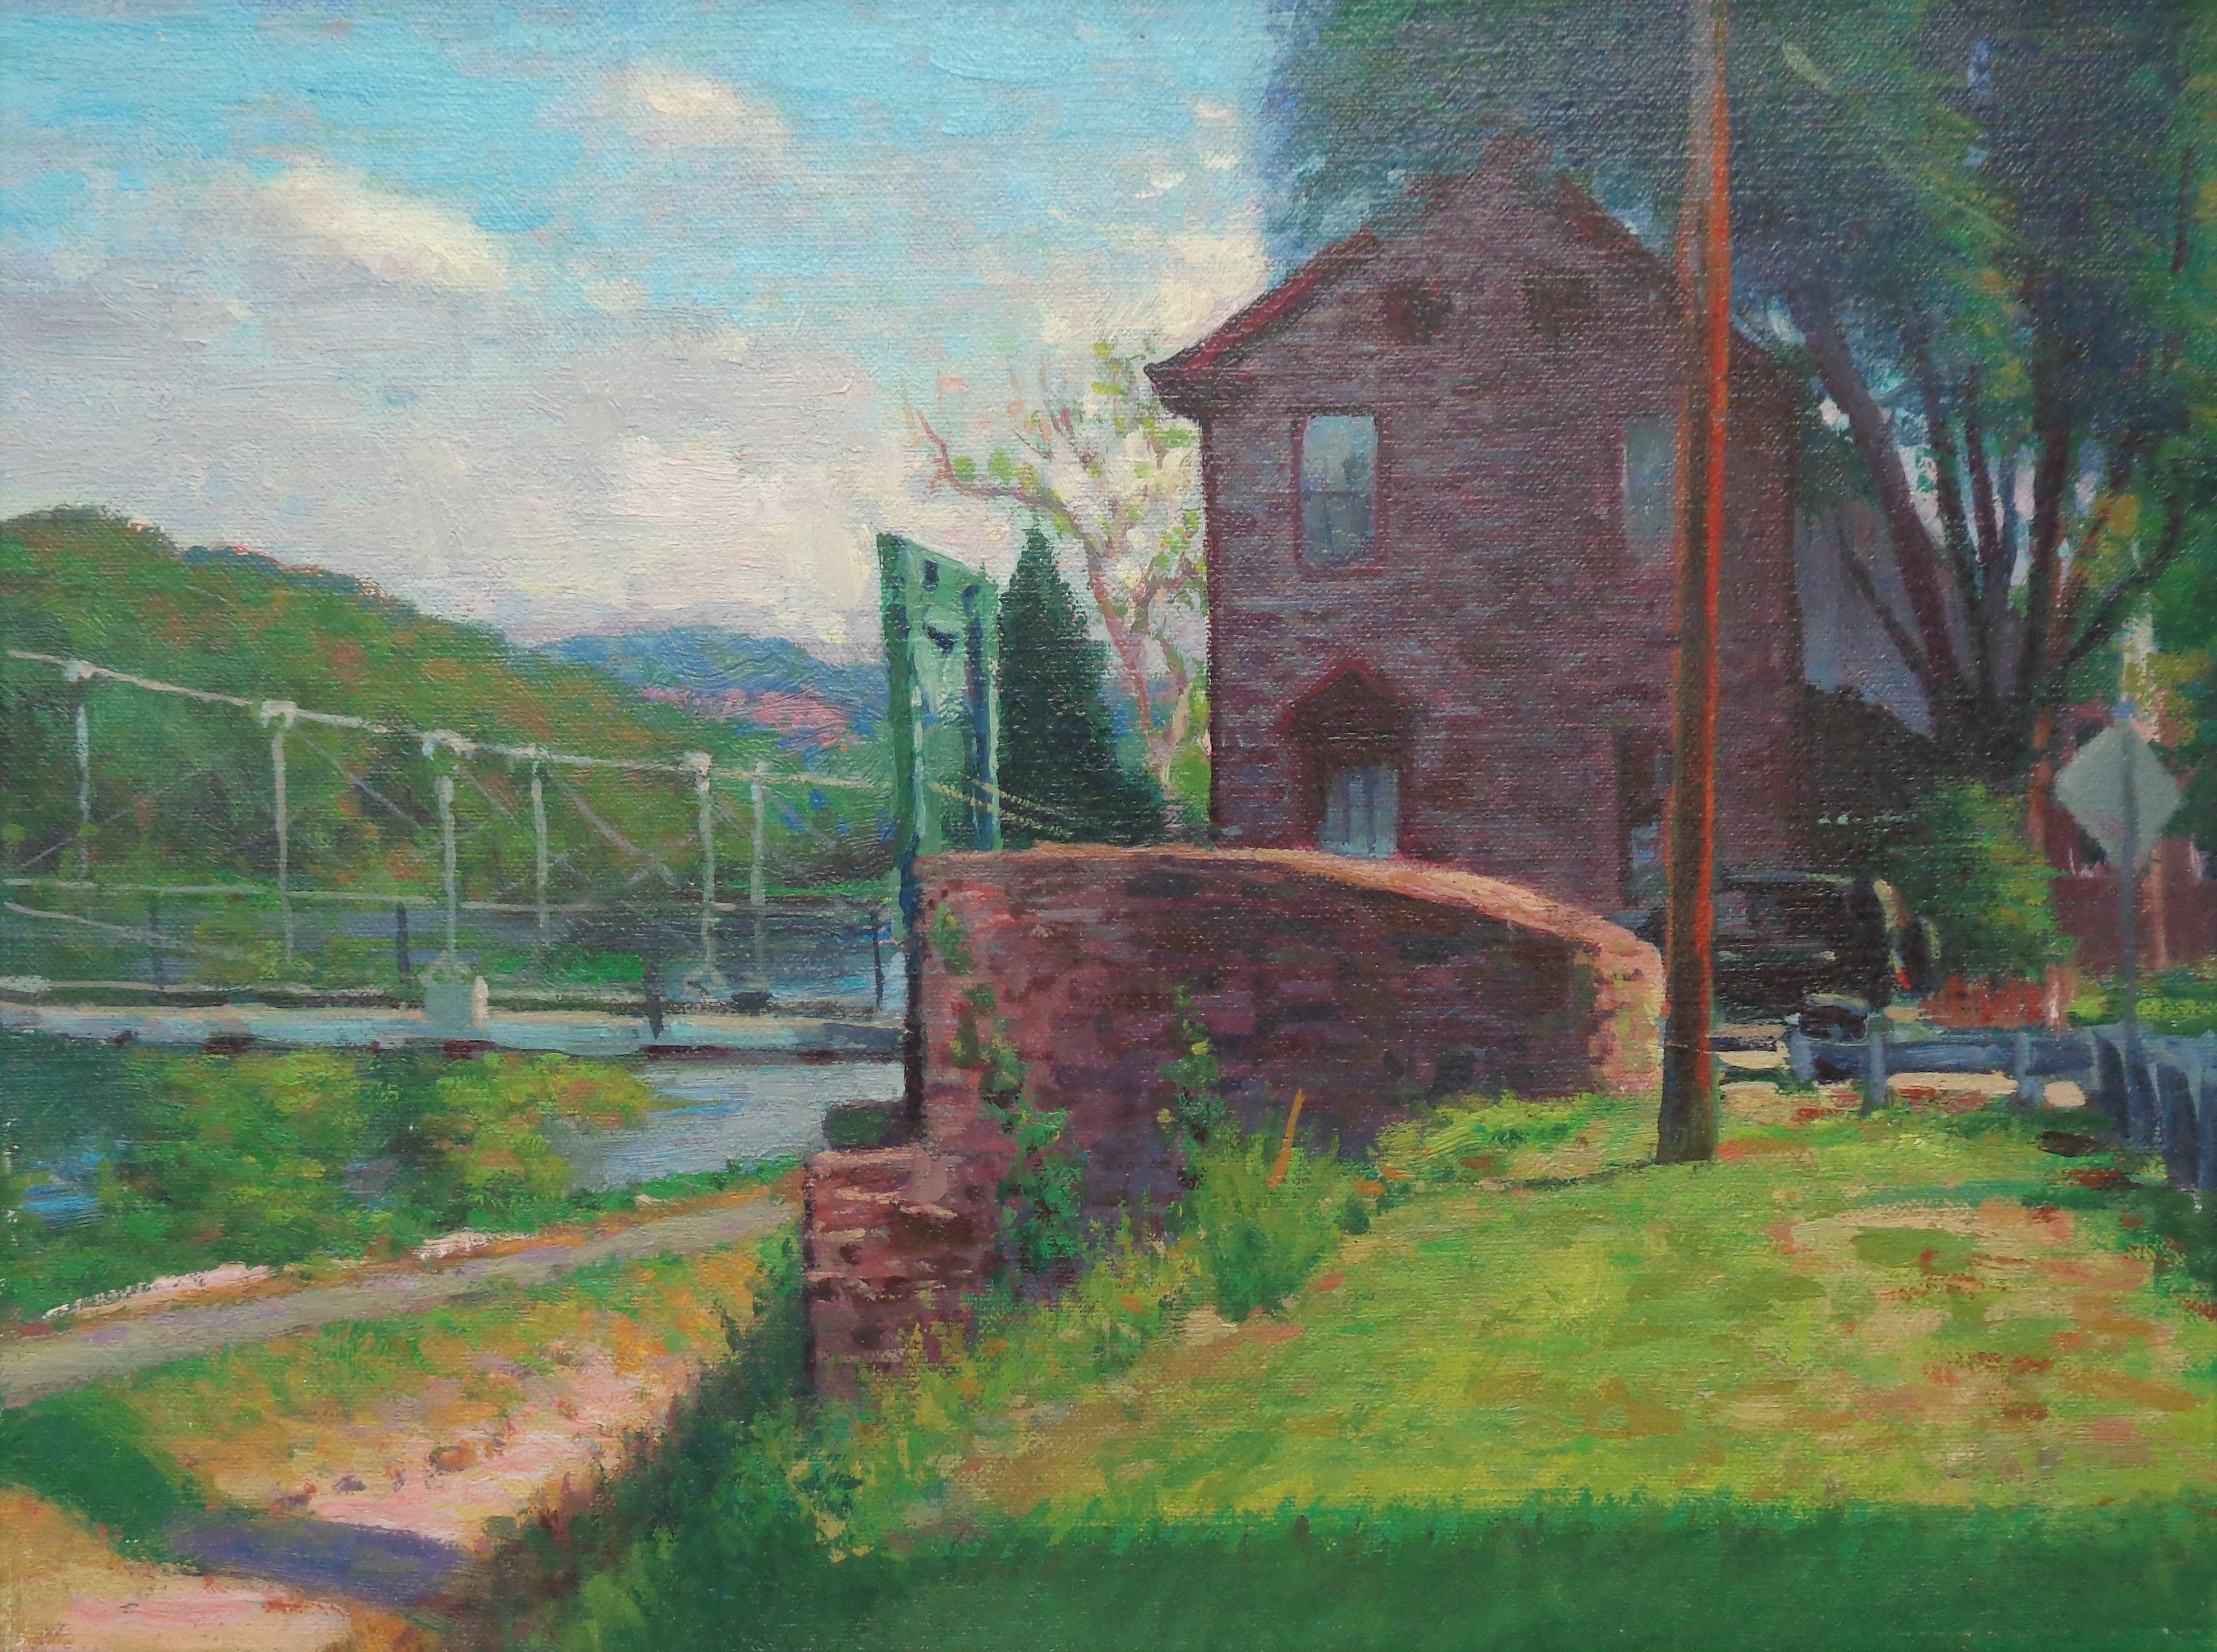 Lumberville Pedestrian Bridge is an impressionistic landscape plein air oil painting that I did on location in Bucks County in 2010 and has been in my collection since. The painting is on a canvas panel and exudes the rich qualities of oil paint